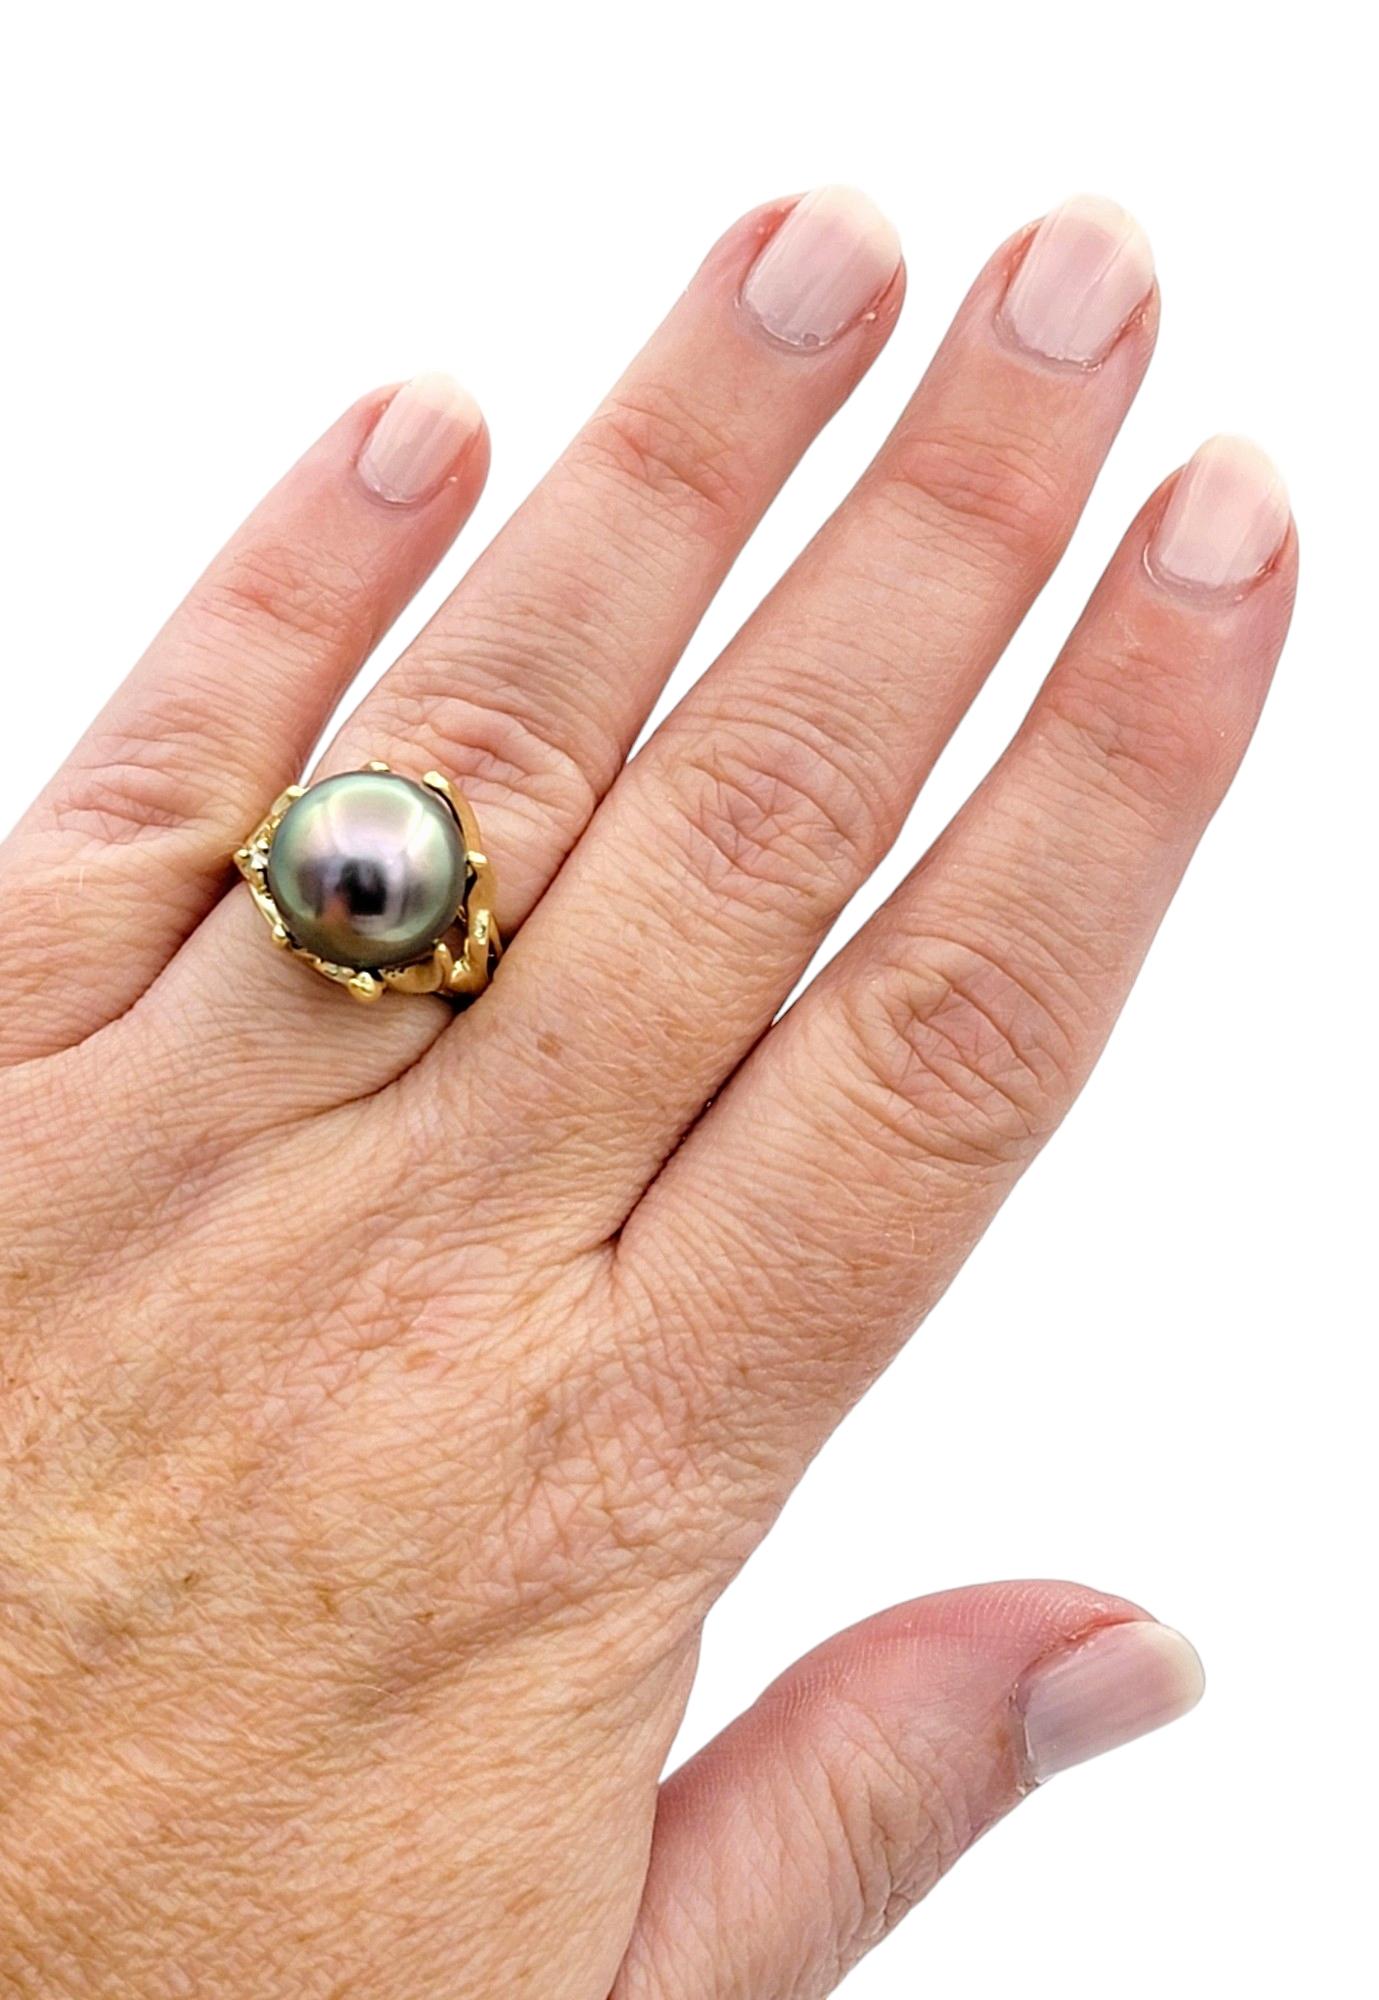 Black Tahitian South Sea Pearl High Profile 14 Karat Yellow Gold Cocktail Ring For Sale 1